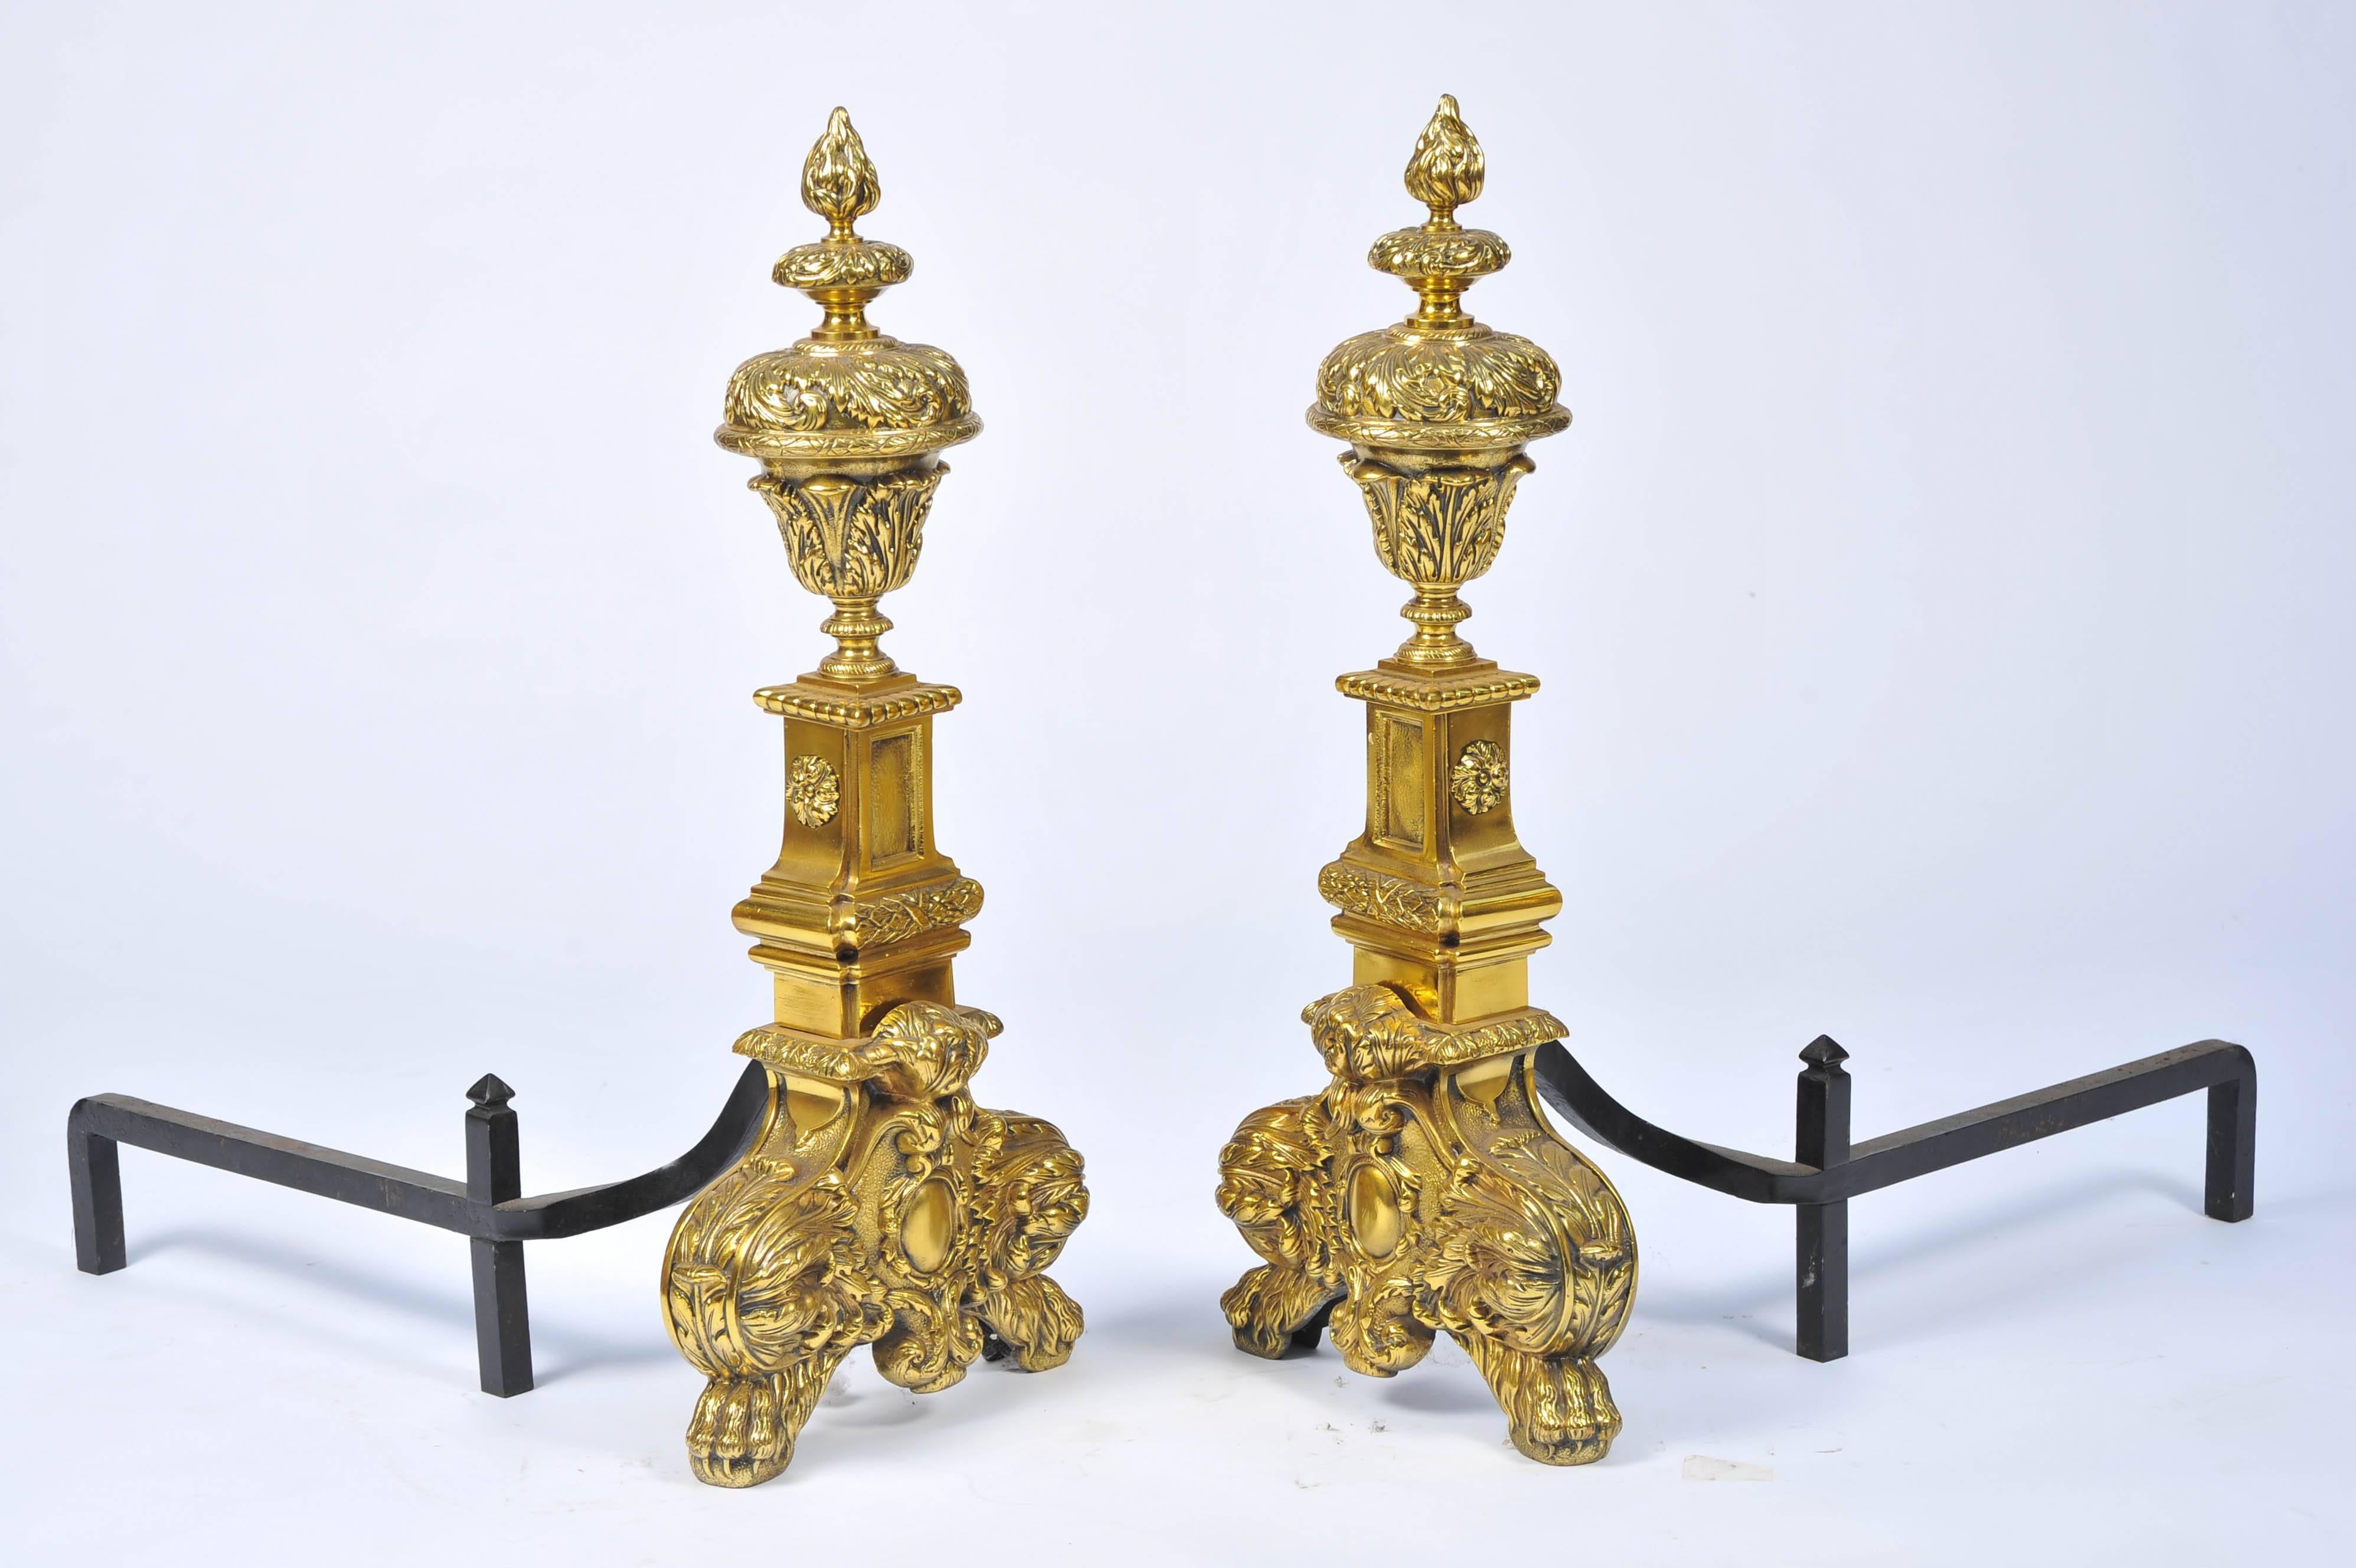 A very impressive pair on 19th century classical brass fire dogs. Having flame like urn finials set on a plinth, raised on foliage decoration and claw feet.